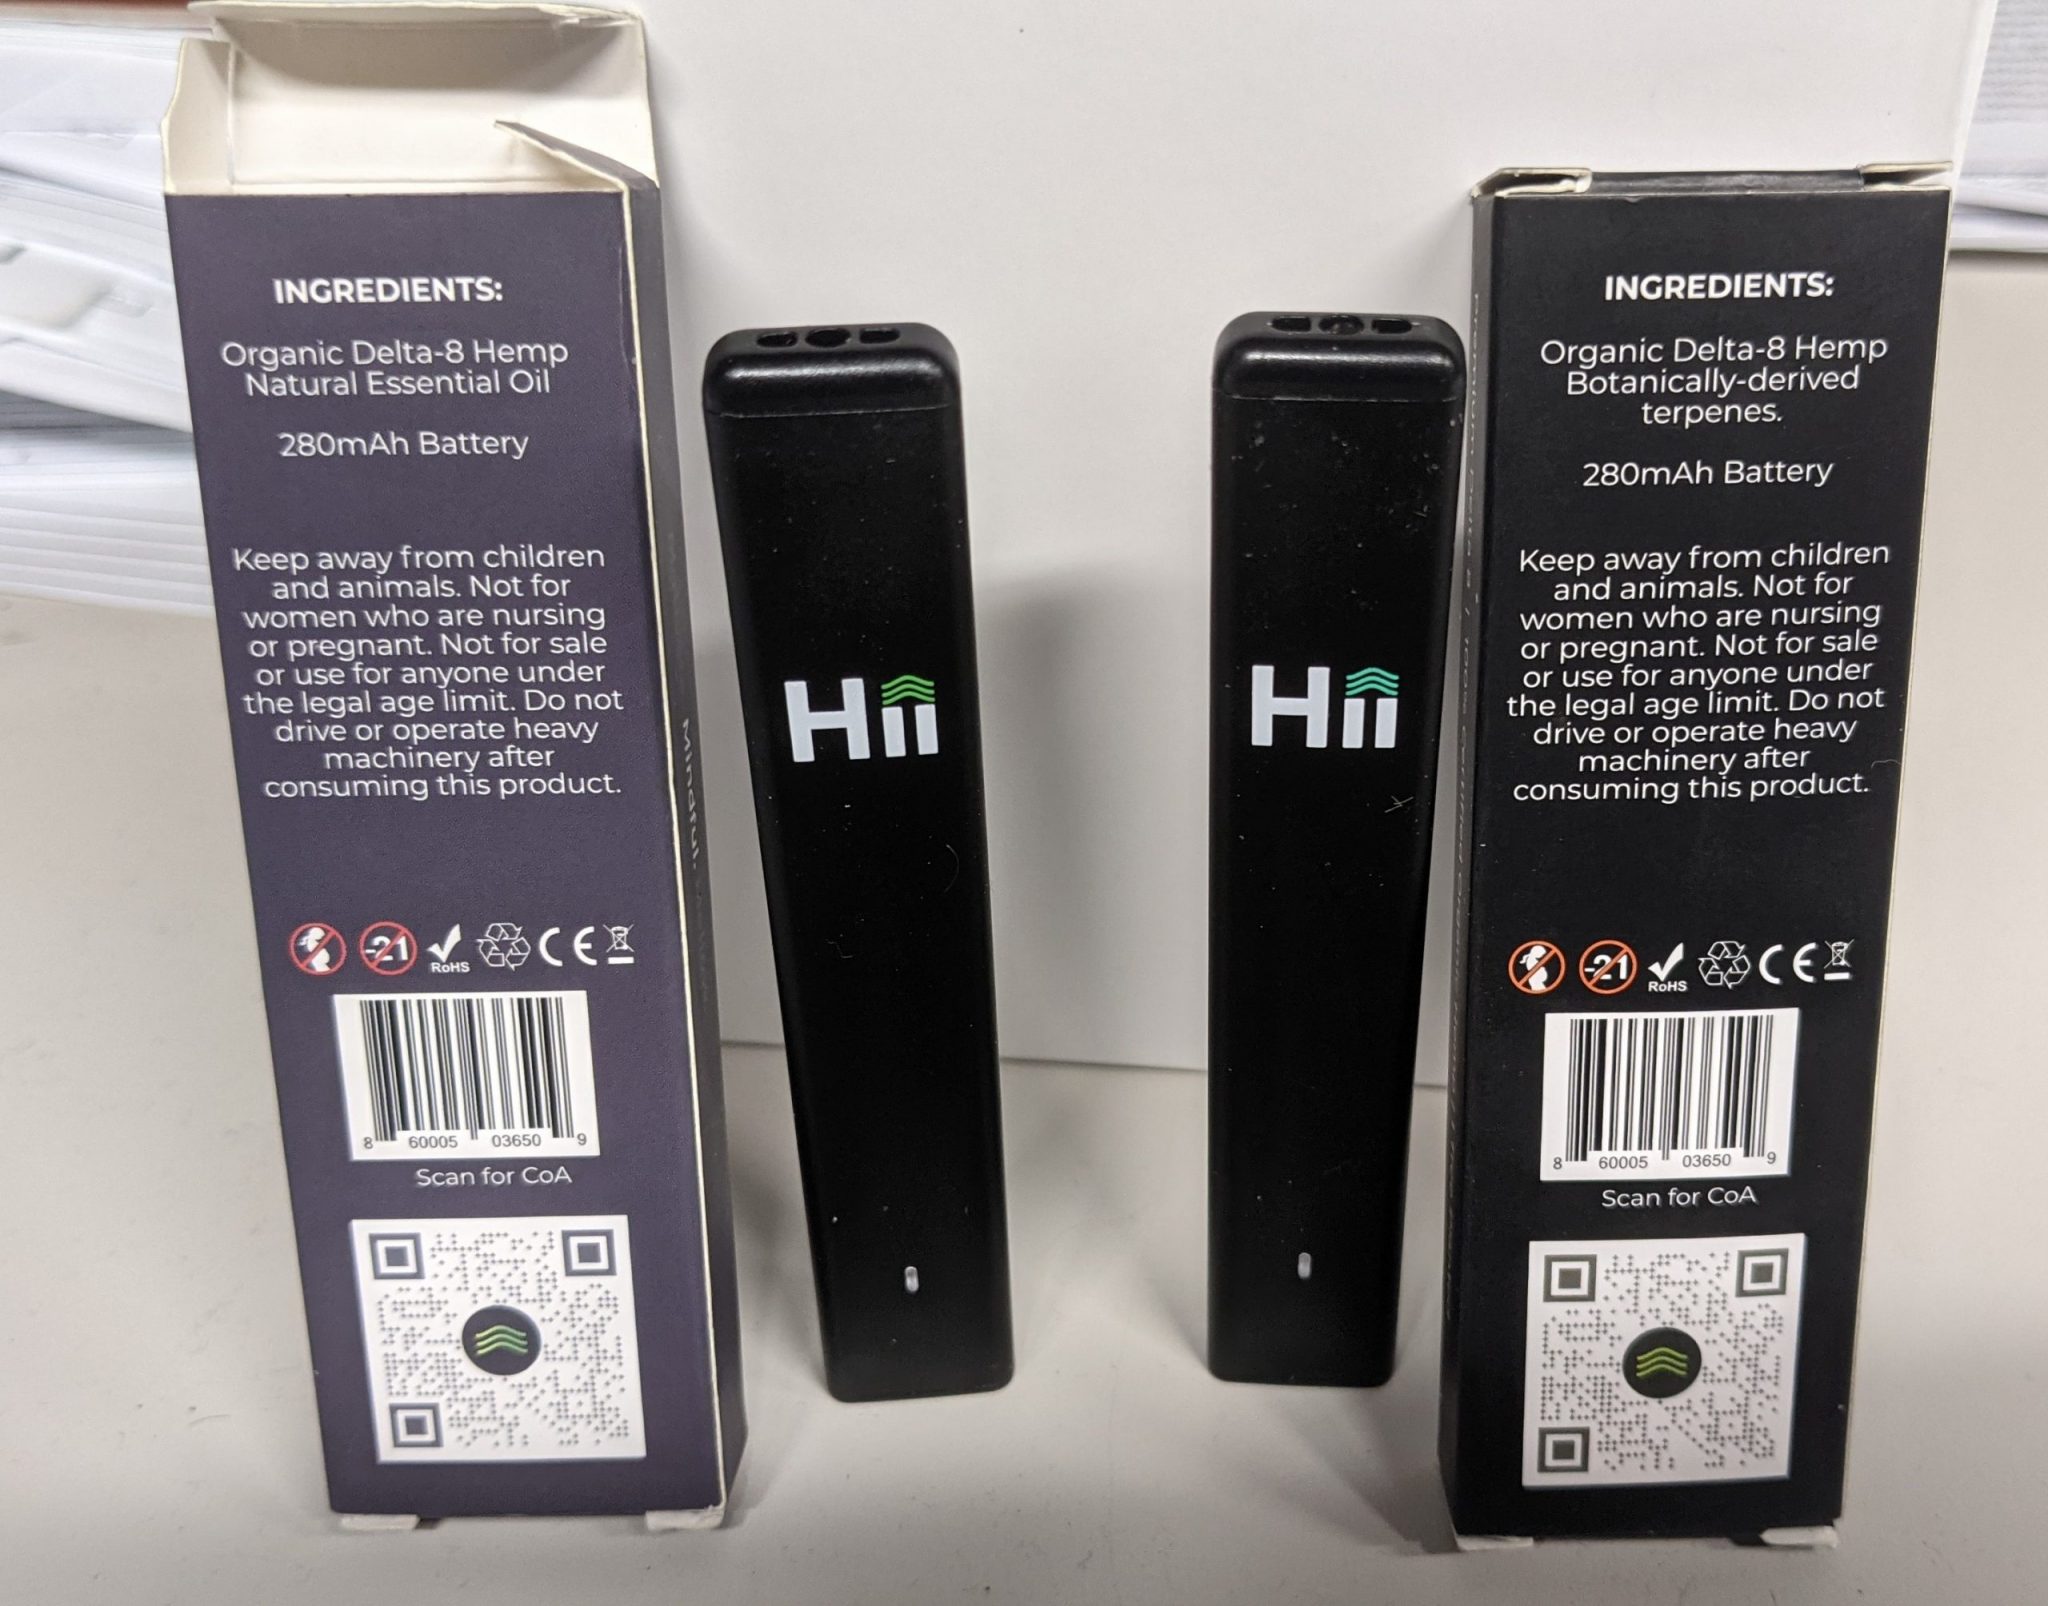 hiistick-diffusers-labels-scaled